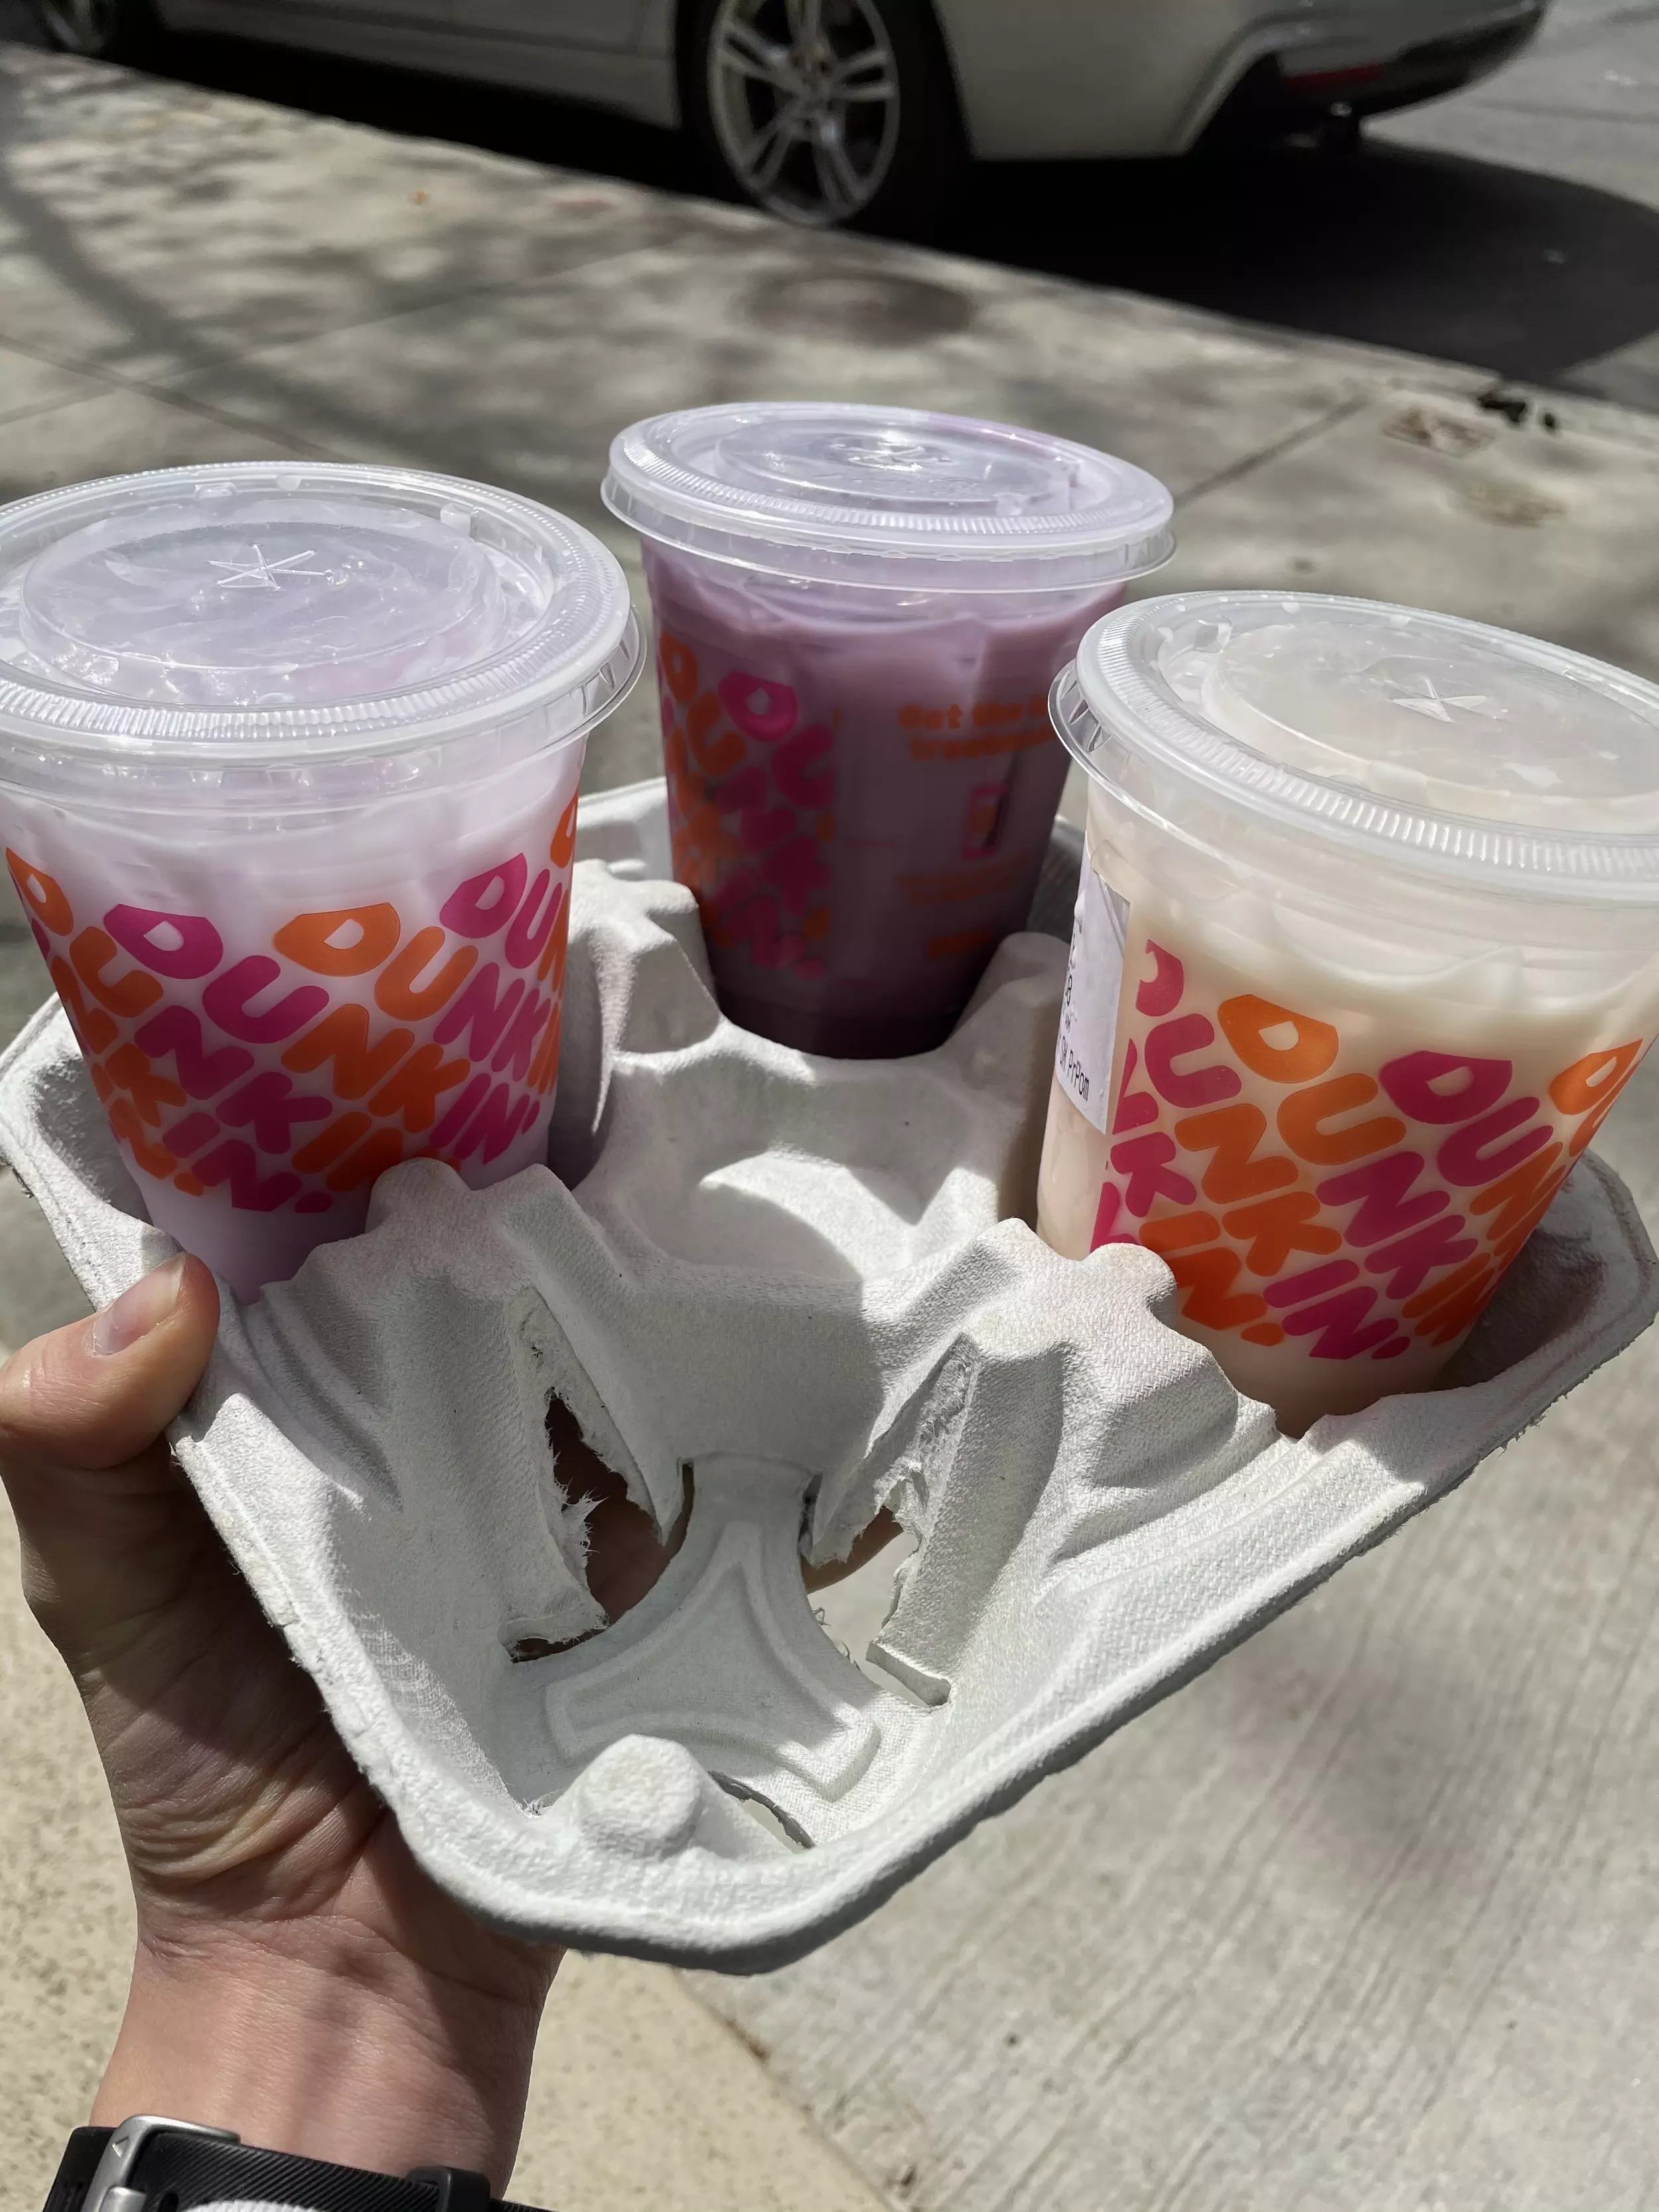 REVIEW: Dunkin' Coconutmilk Iced Latte - The Impulsive Buy